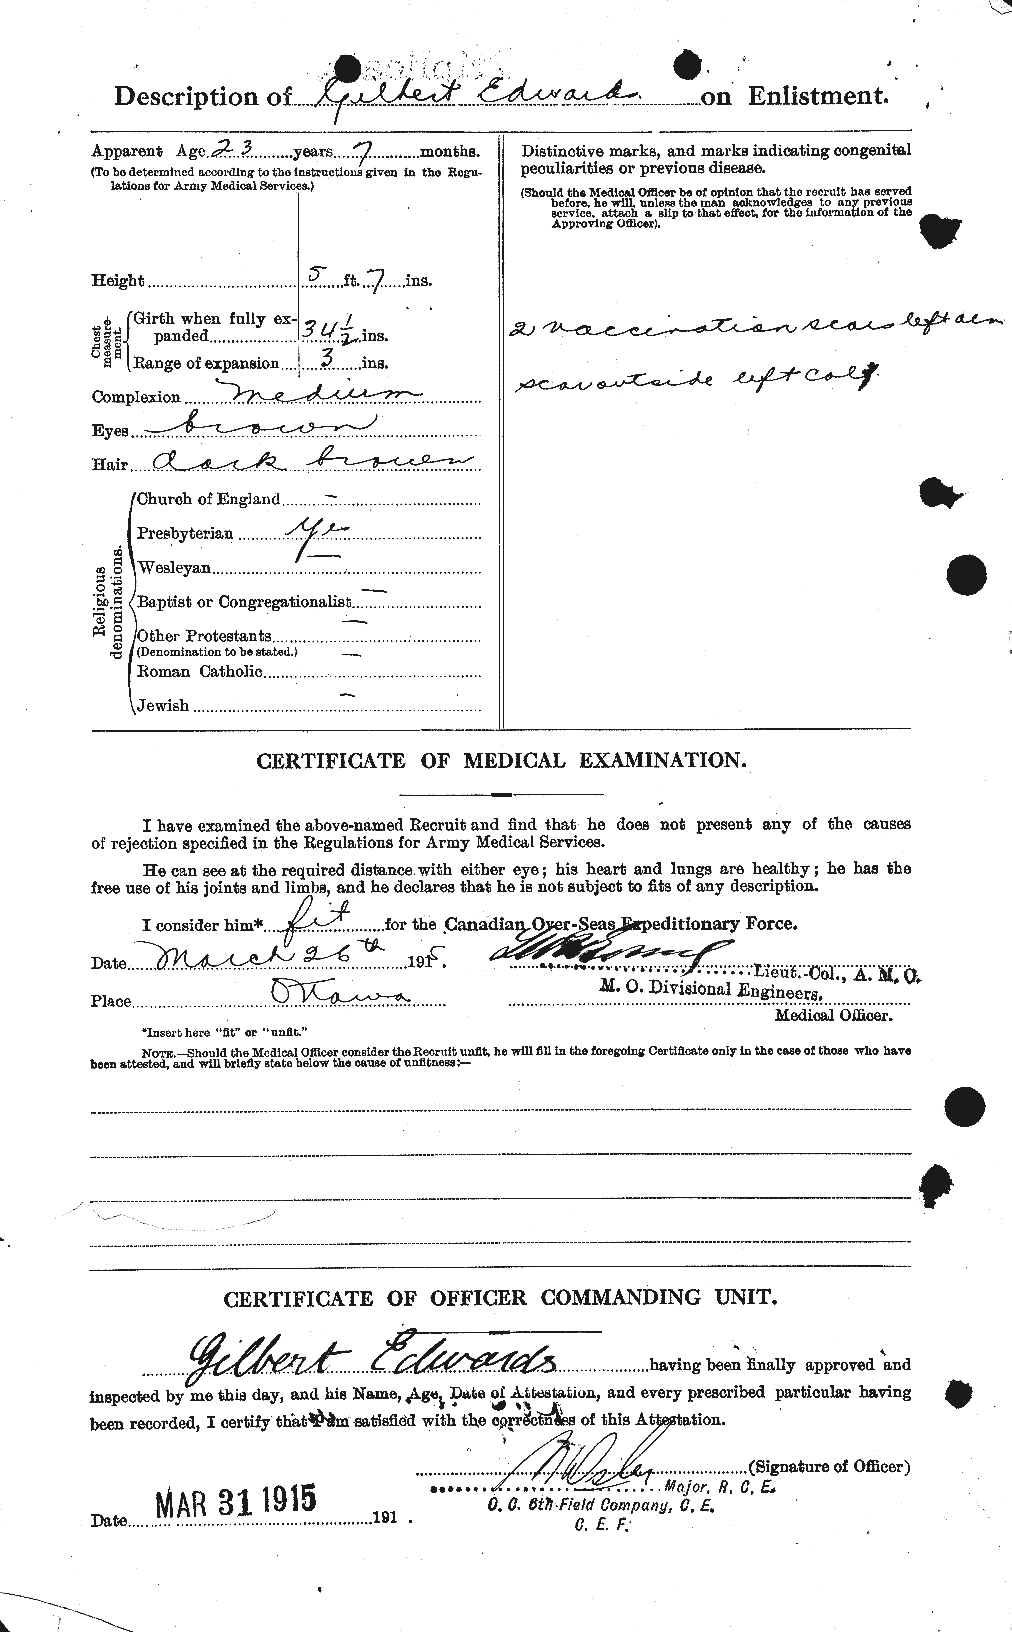 Personnel Records of the First World War - CEF 309702b